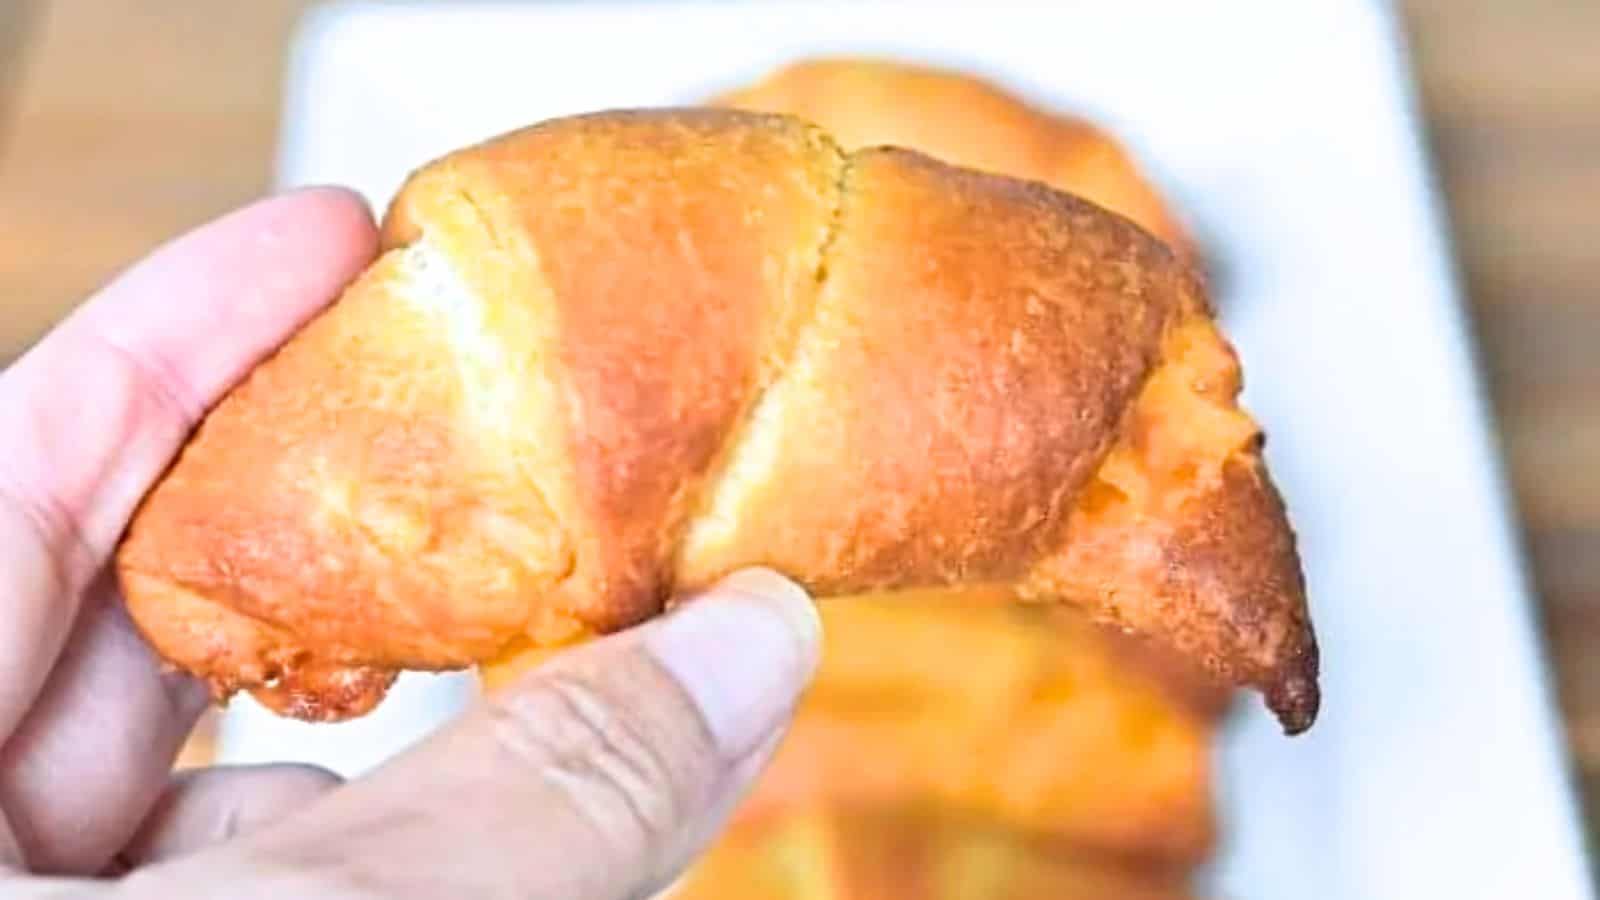 Image shows A person holding a buffalo chicken roll over a plate filled with more.